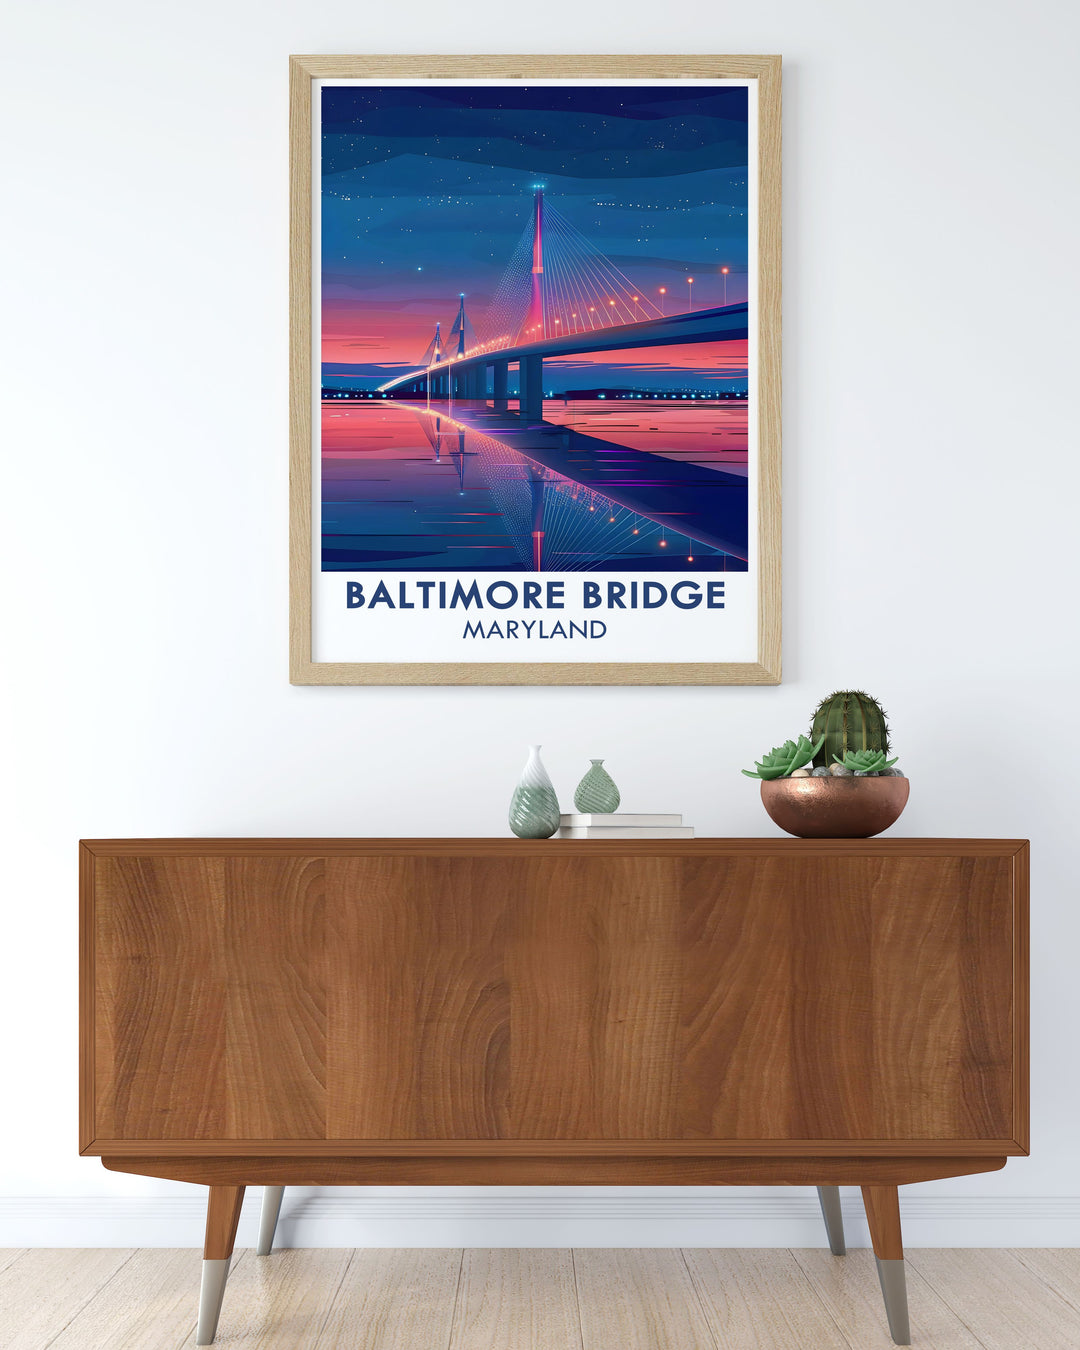 Stunning art print of the new Key Bridge design in Baltimore. The detailed illustration captures the bridge and cityscape, making it a perfect piece for home decor and Maryland artwork collections.